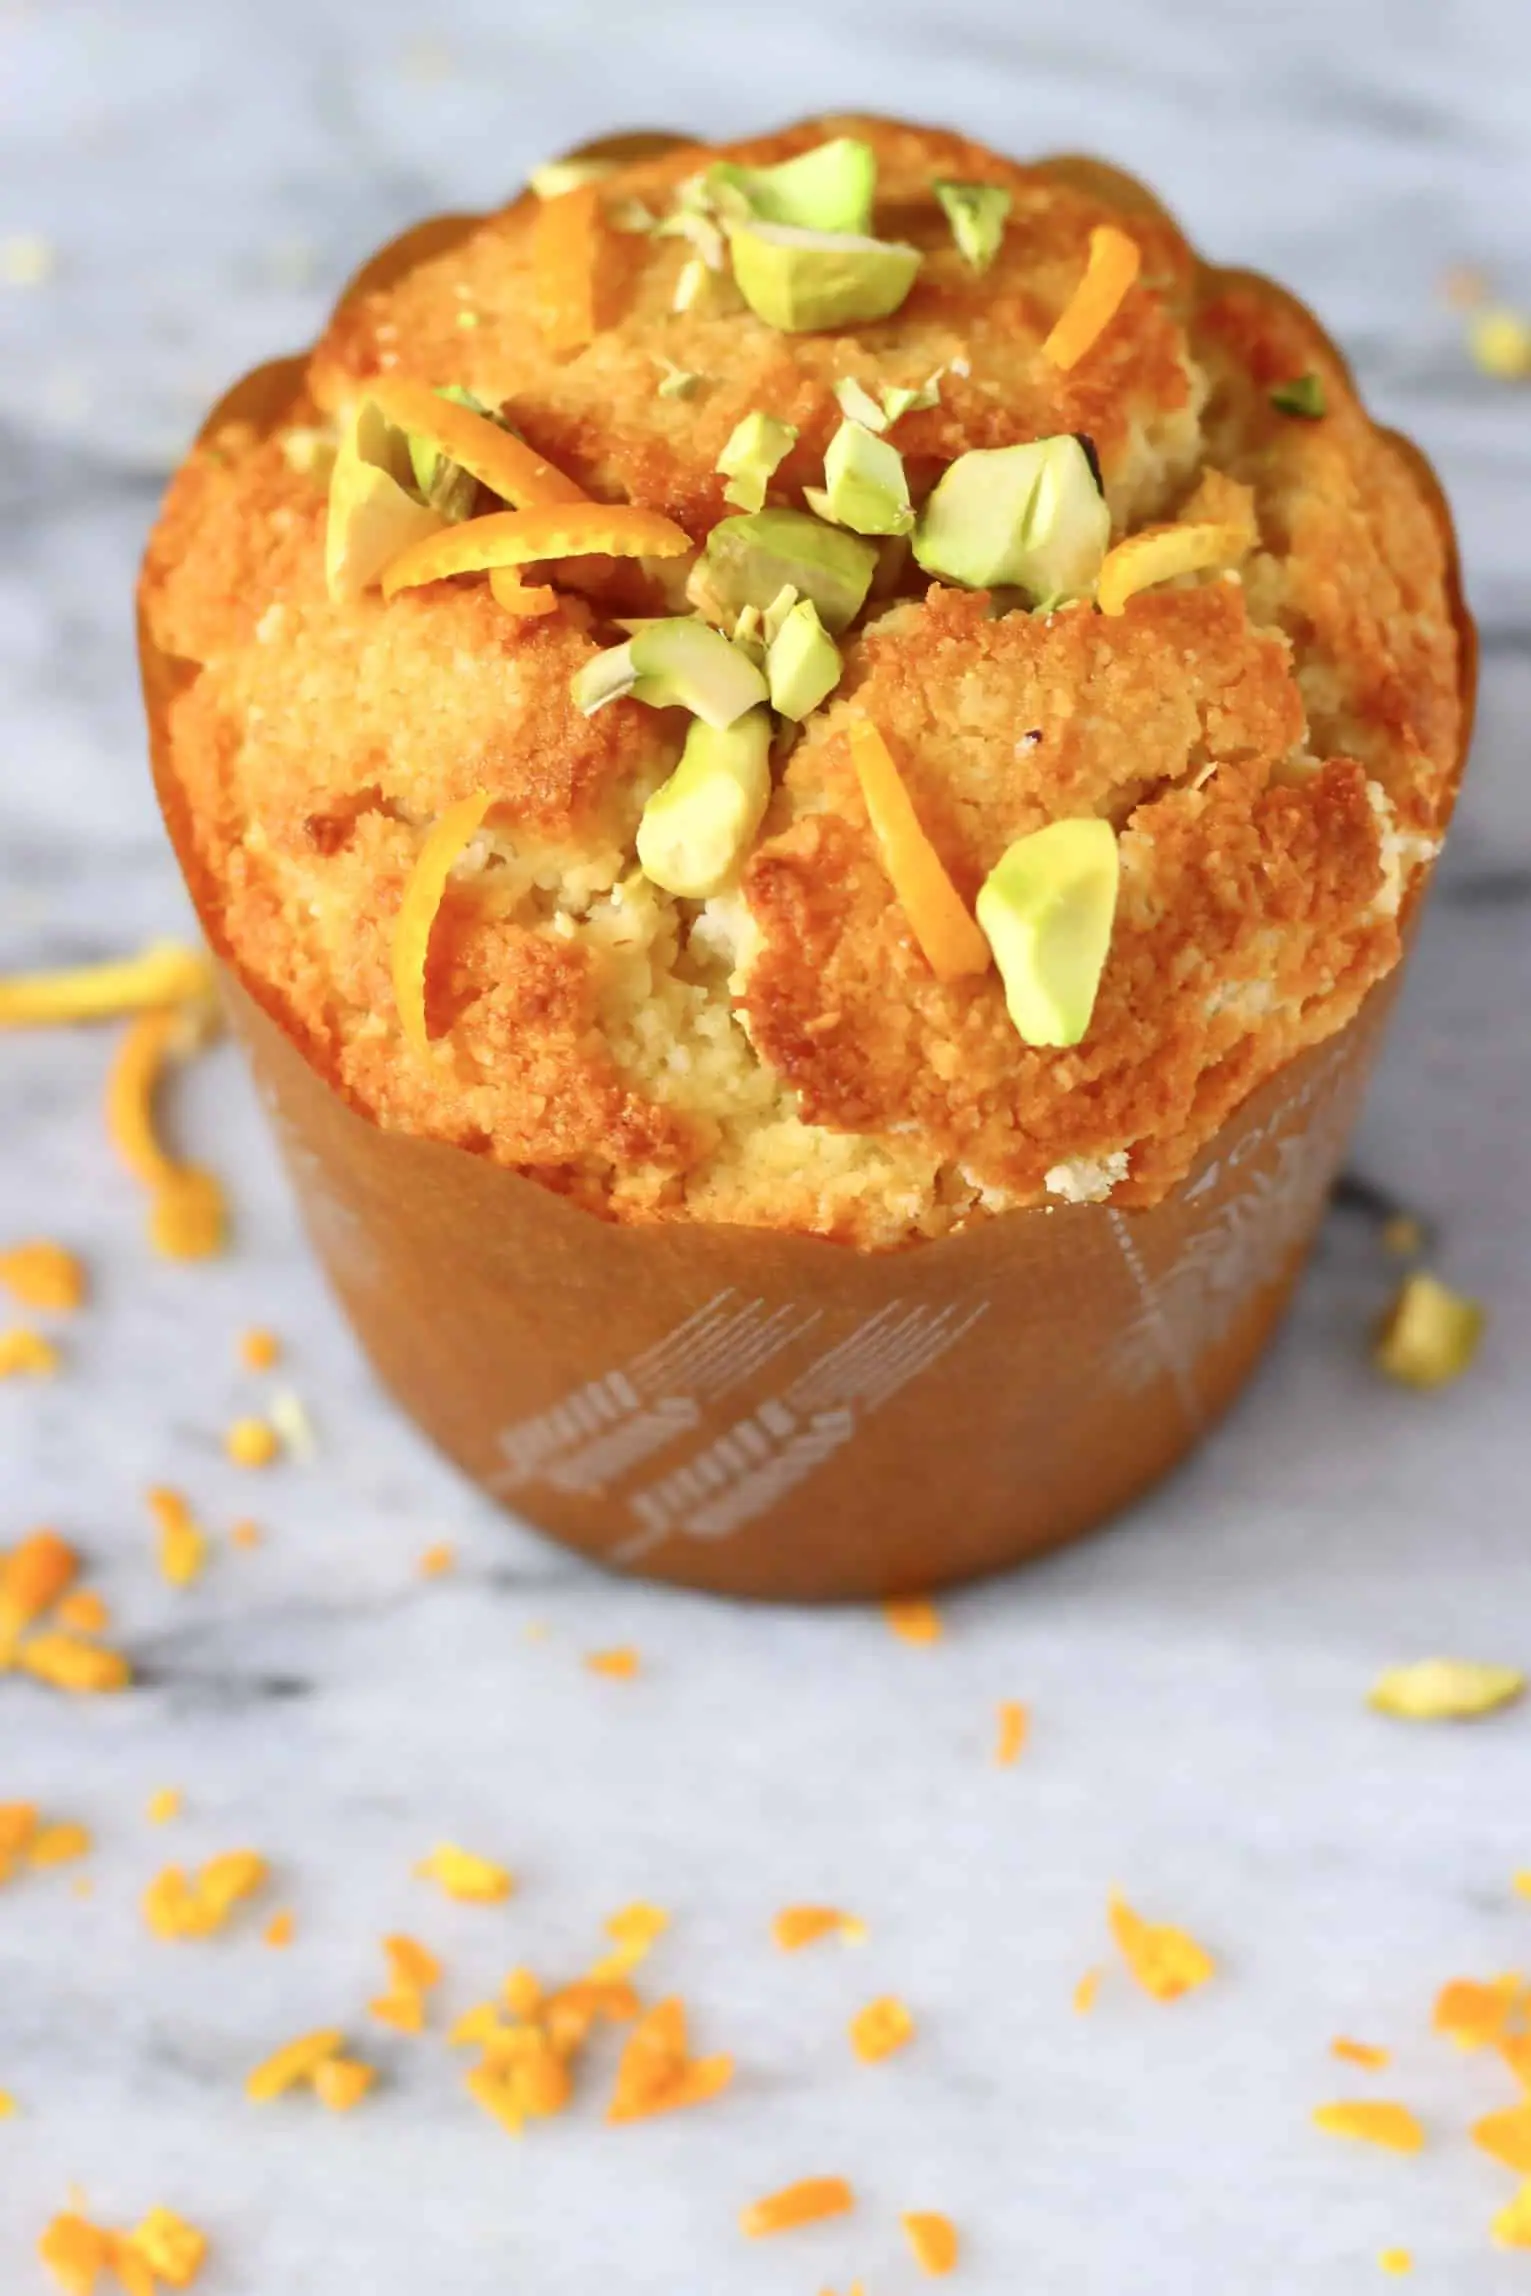 A gluten-free vegan orange muffin in a brown muffin case topped with chopped pistachios